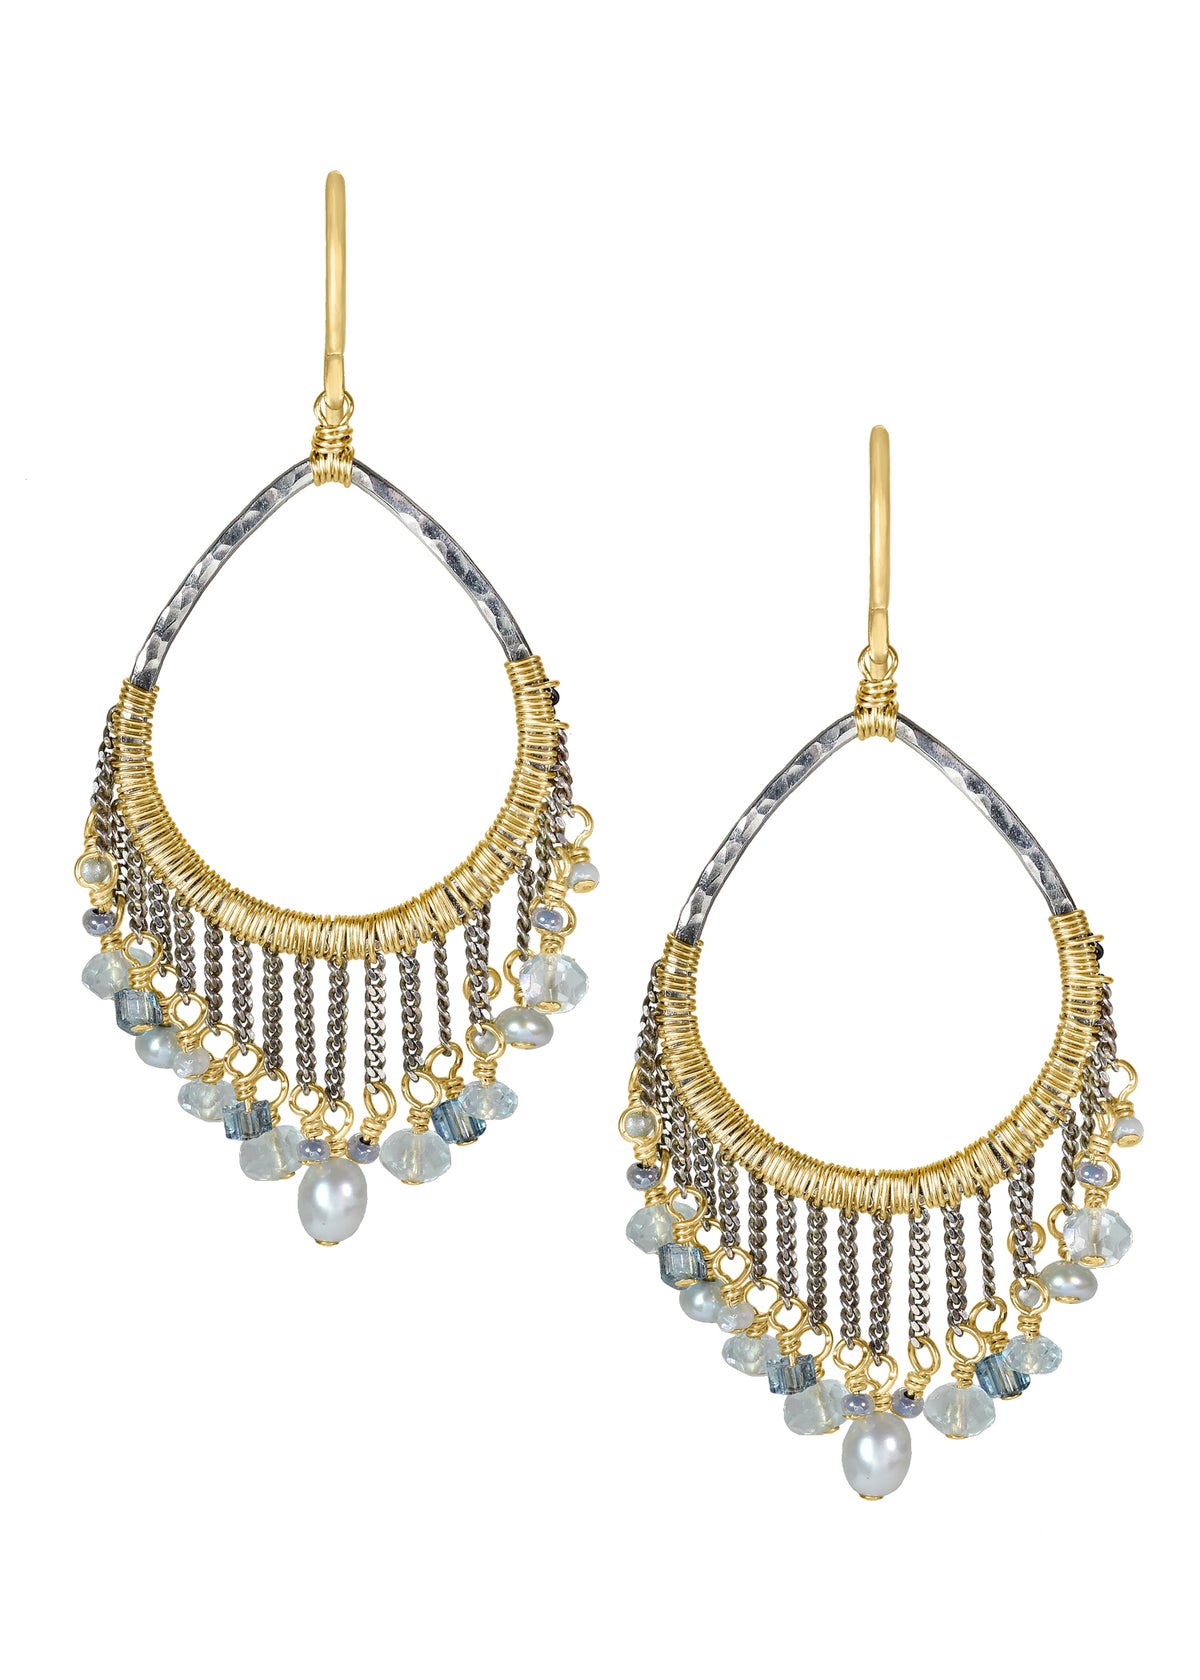 Freshwater pearl Aquamarine Seed beads 14k gold fill Sterling silver Mixed metal Earrings measure 2&quot; in length (including the ear wires) and 1-1/8&quot; in width at the widest point Handmade in our Los Angeles studio